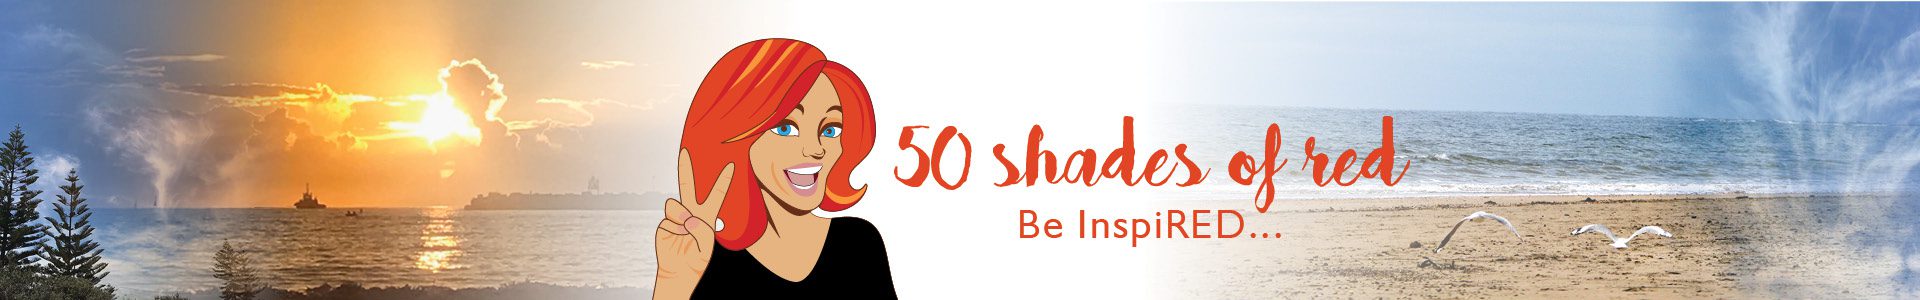 Blog - Fifty shades of red. Be inspired.